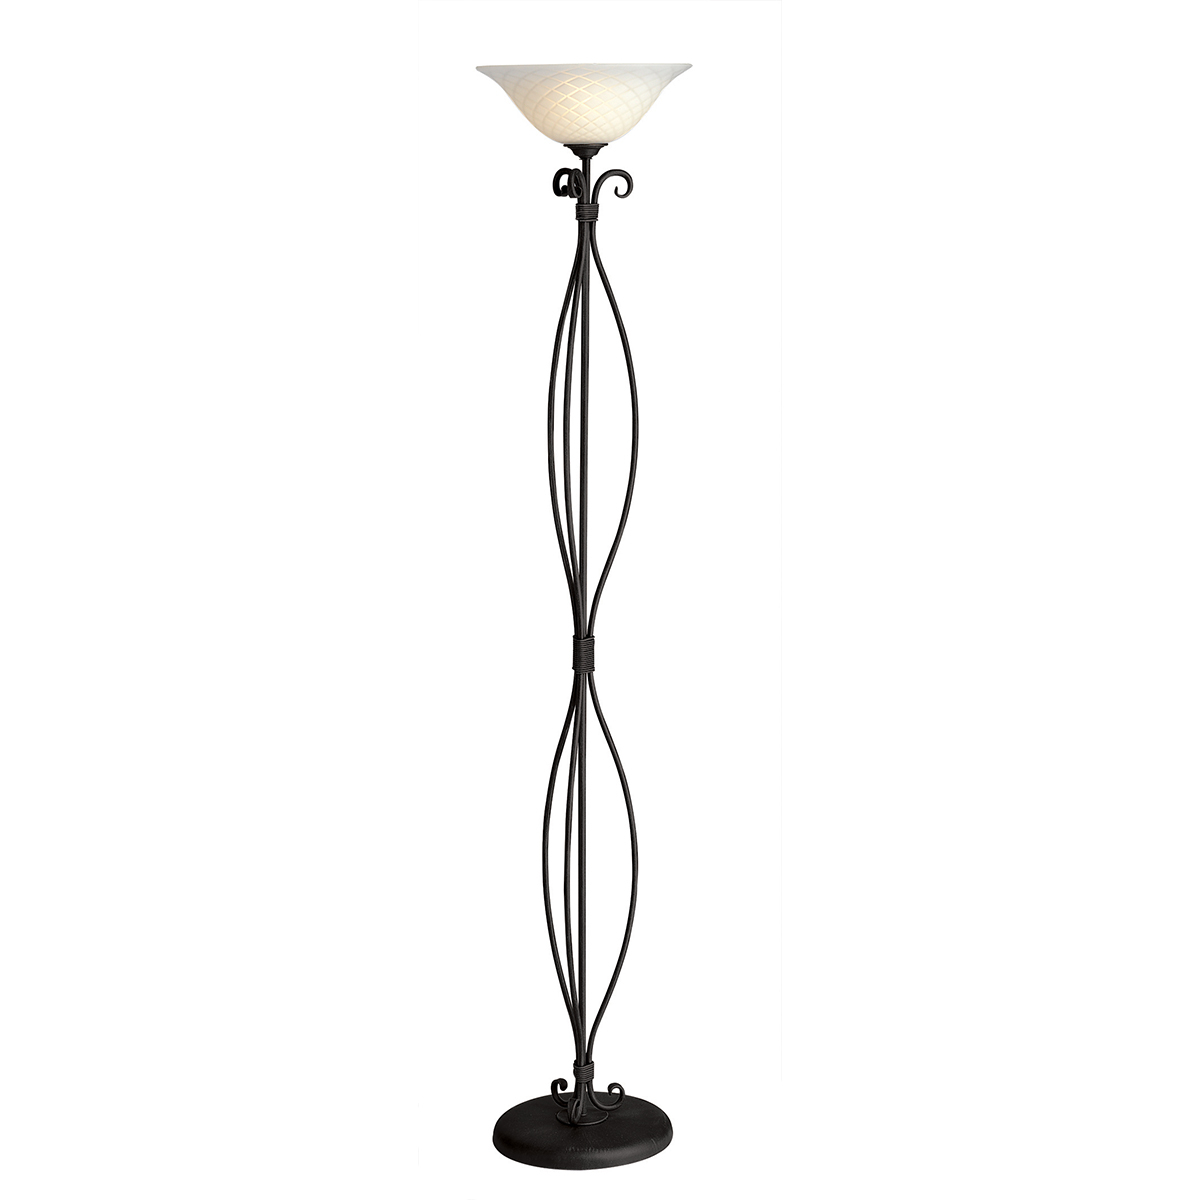 Torchiere Uplighter Floor Lamp Black within sizing 1200 X 1200